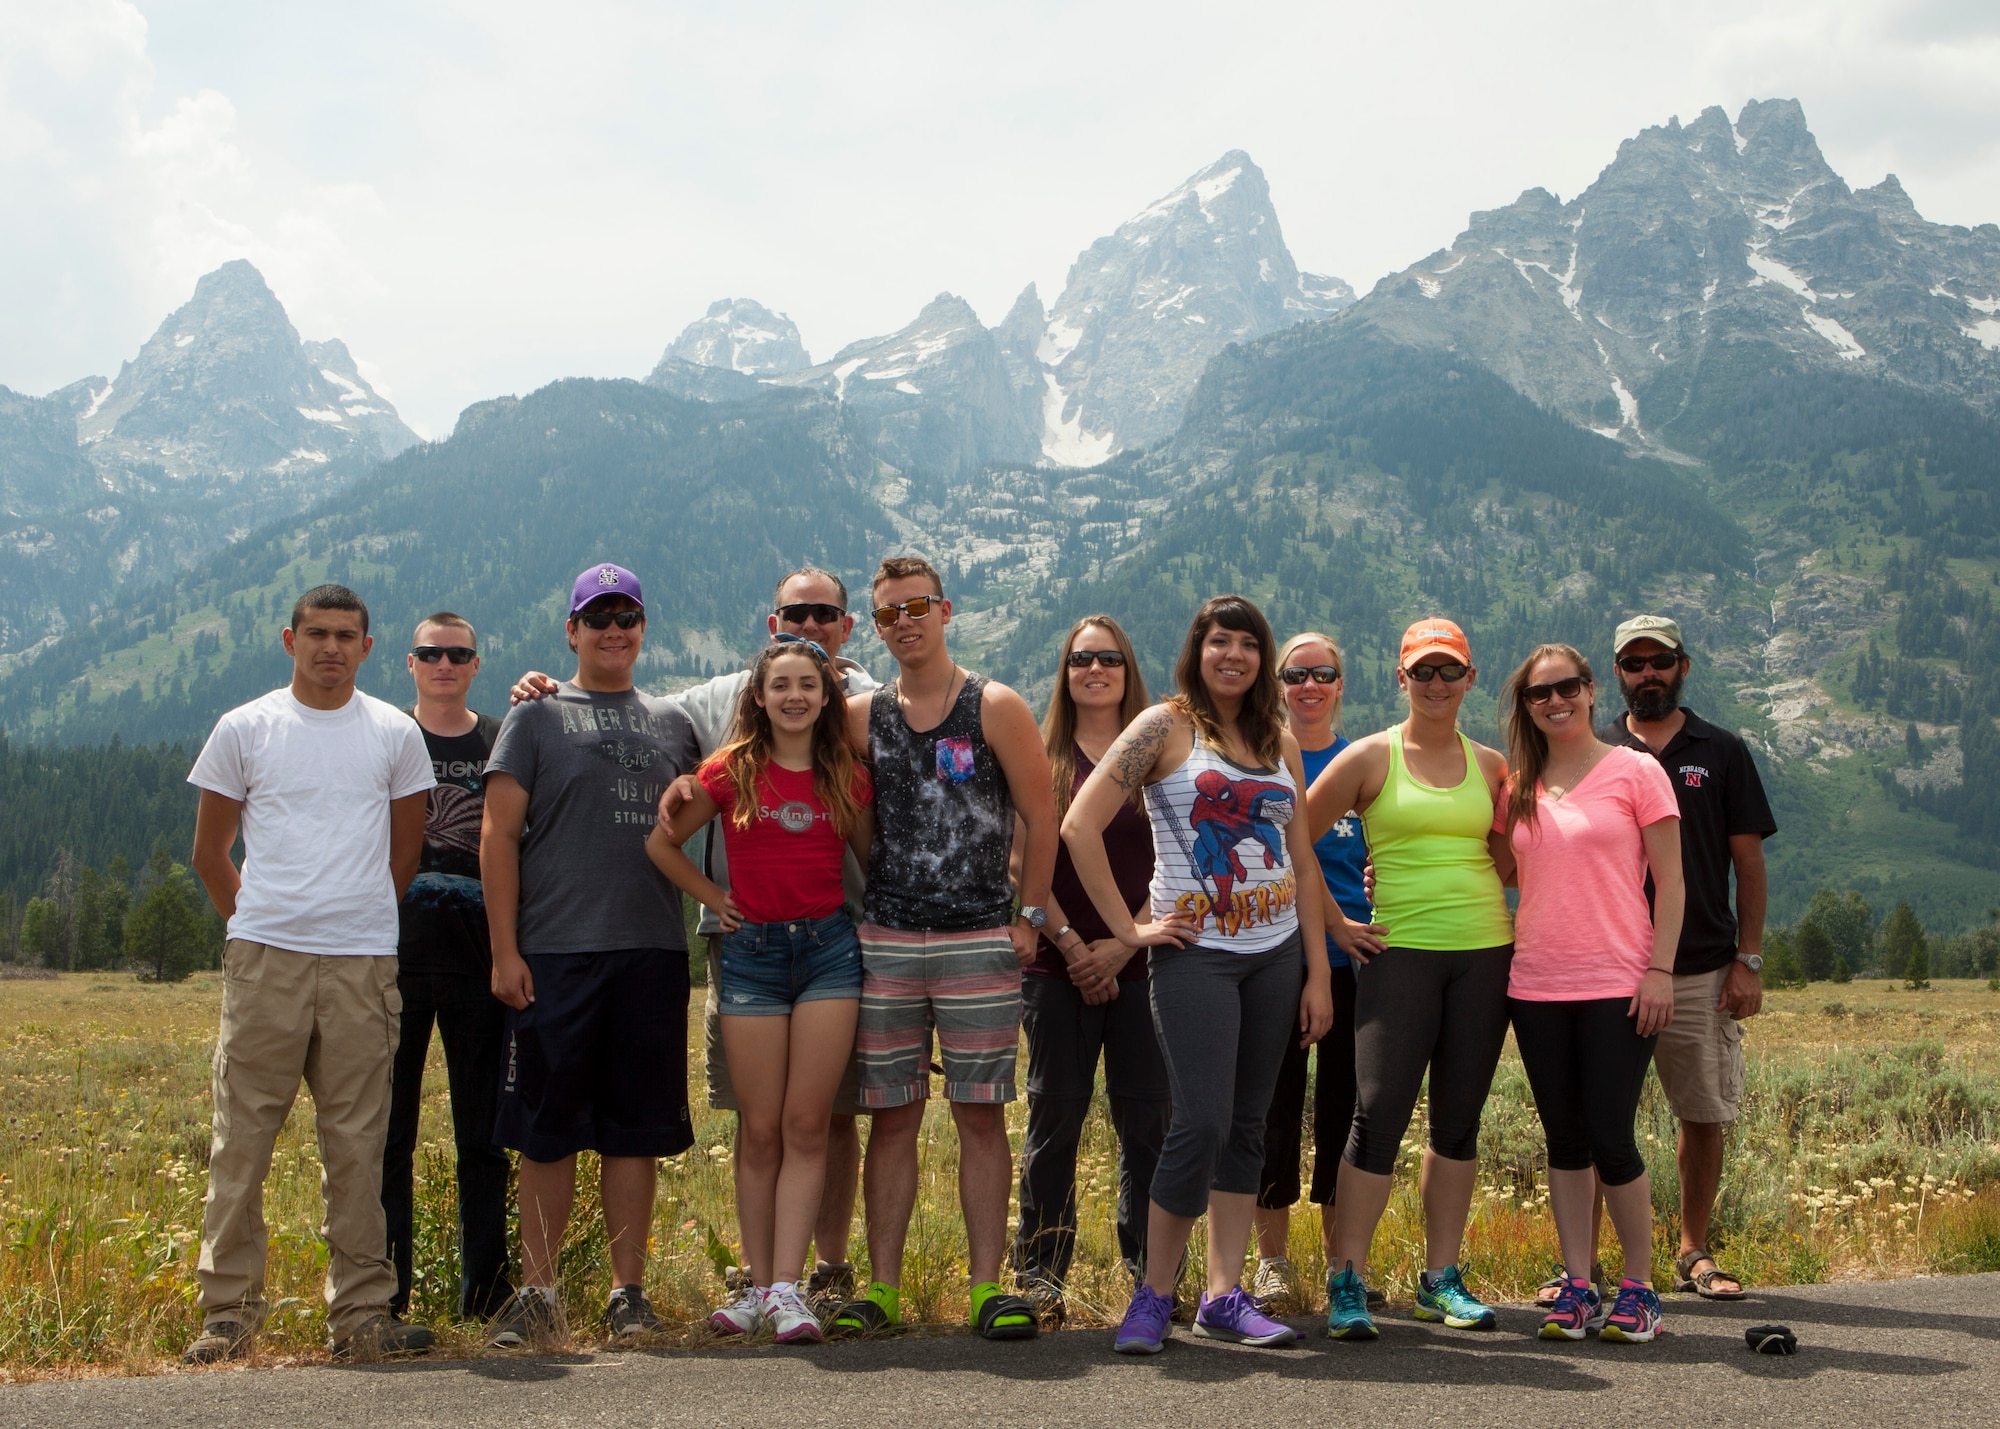 Trip participants of an F.E. Warren Air Force Base Outdoor Recreation trip pose for a group photo with the Teton Range in the background in Grand Teton National Park, Wyo., July 3, 2015. Outdoor Recreation hosted a trip to Grand Teton and Yellowstone National Park for the July 4th weekend which included camping, hiking and sightseeing the natural attractions of the parks. (U.S. Air Force photo by Lan Kim)